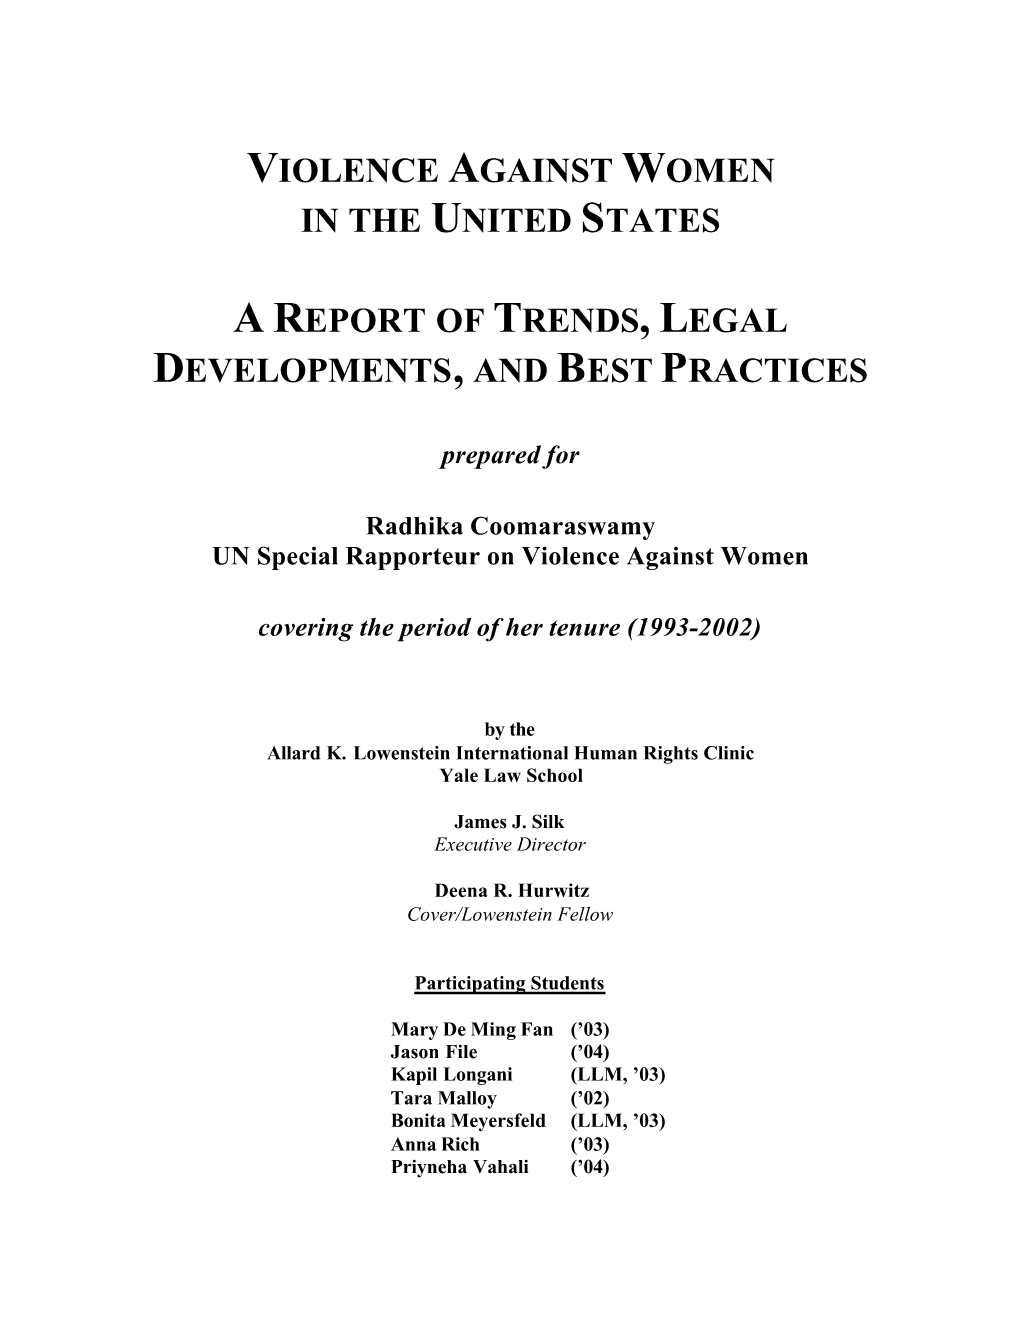 Violence Against Women in the United States